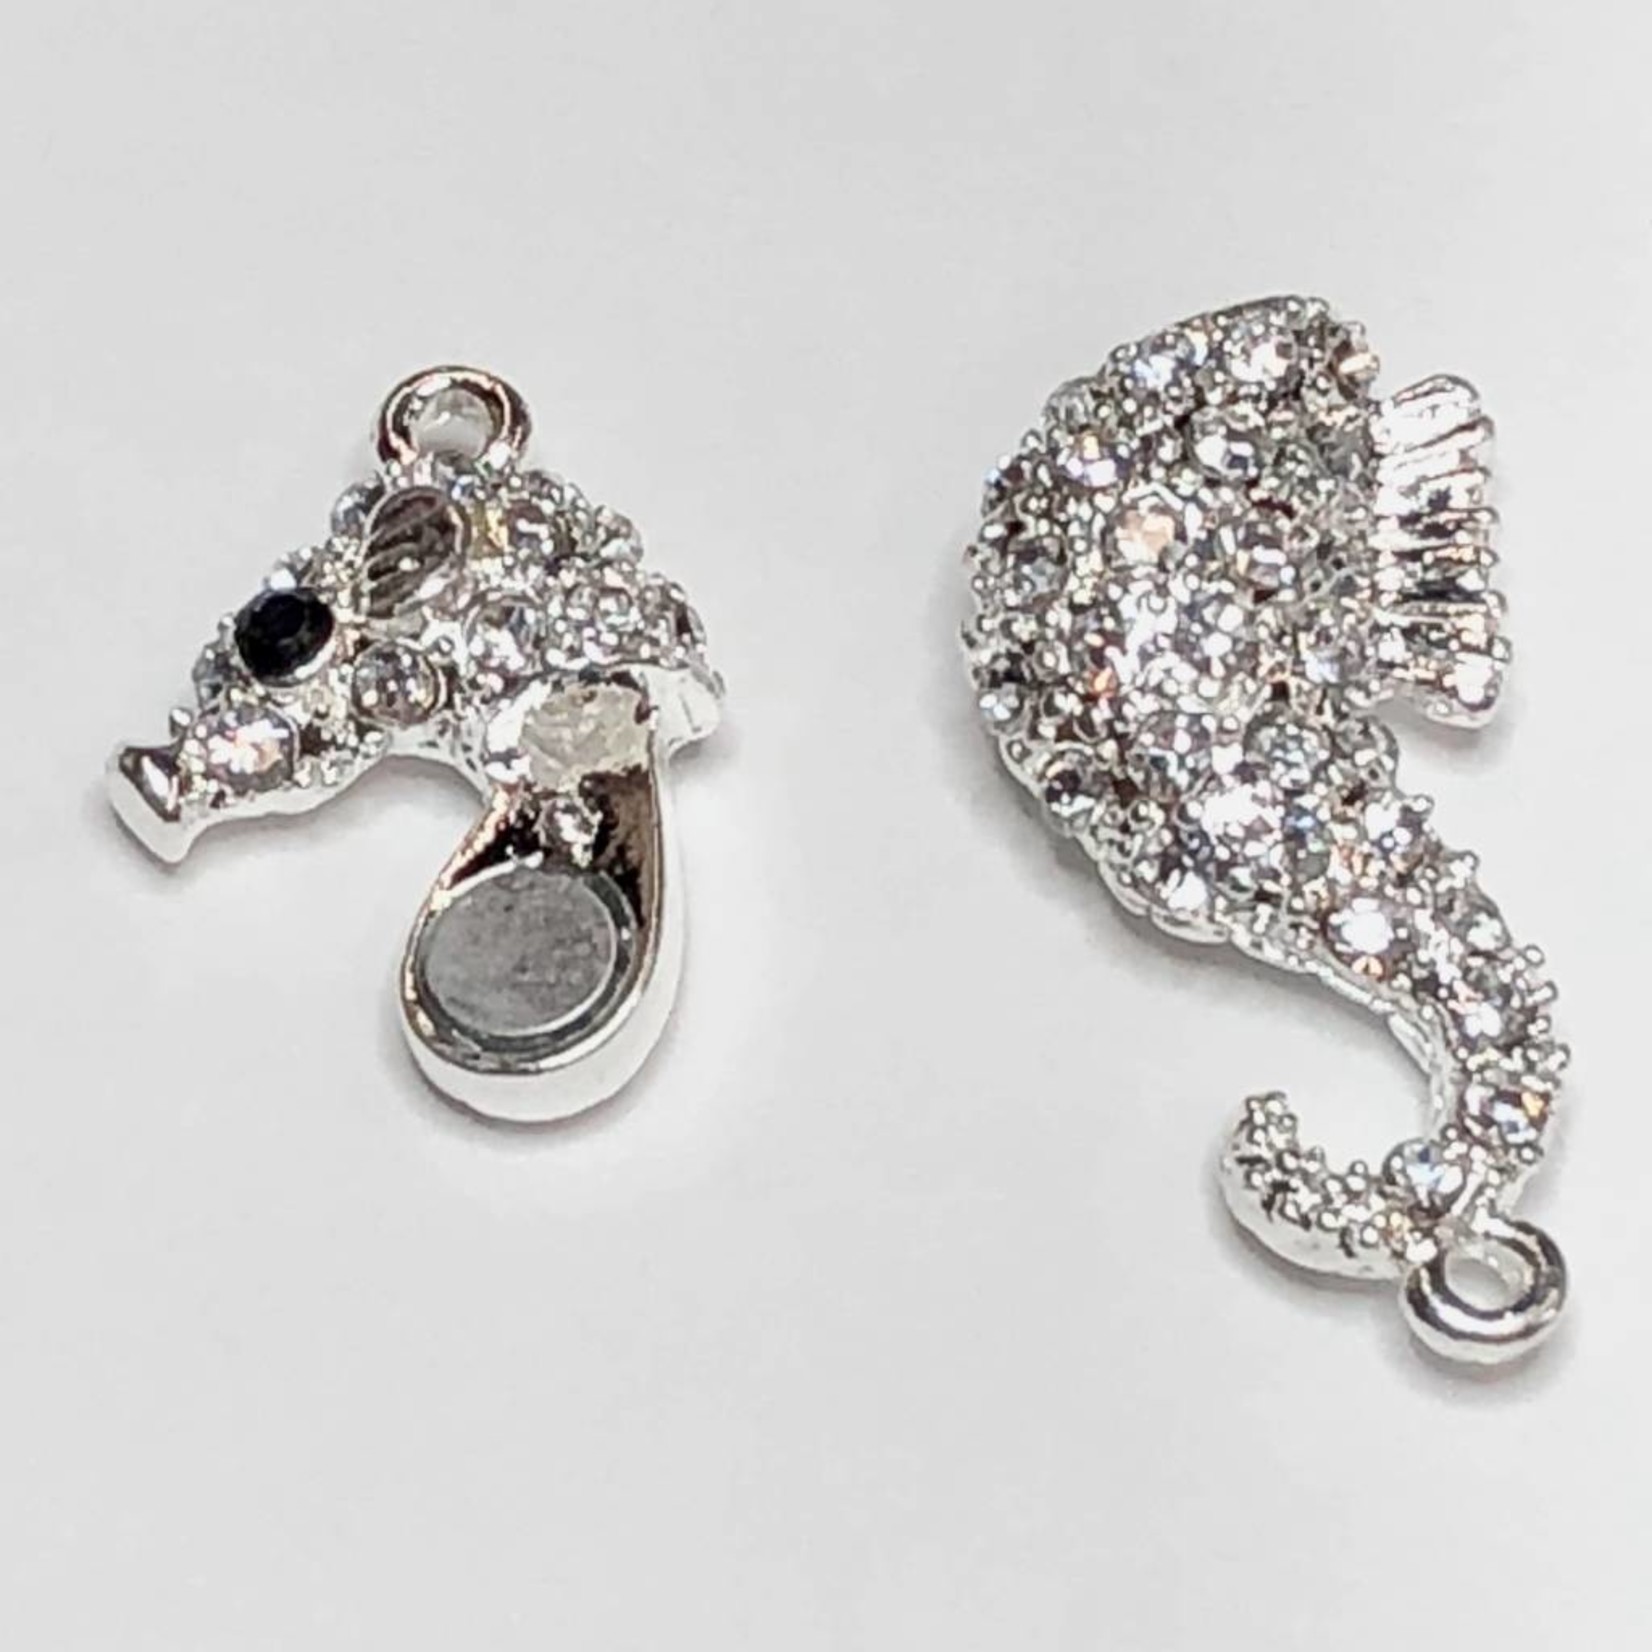 Silver Plated Rhinestone Sea Horse Magnetic Clasp